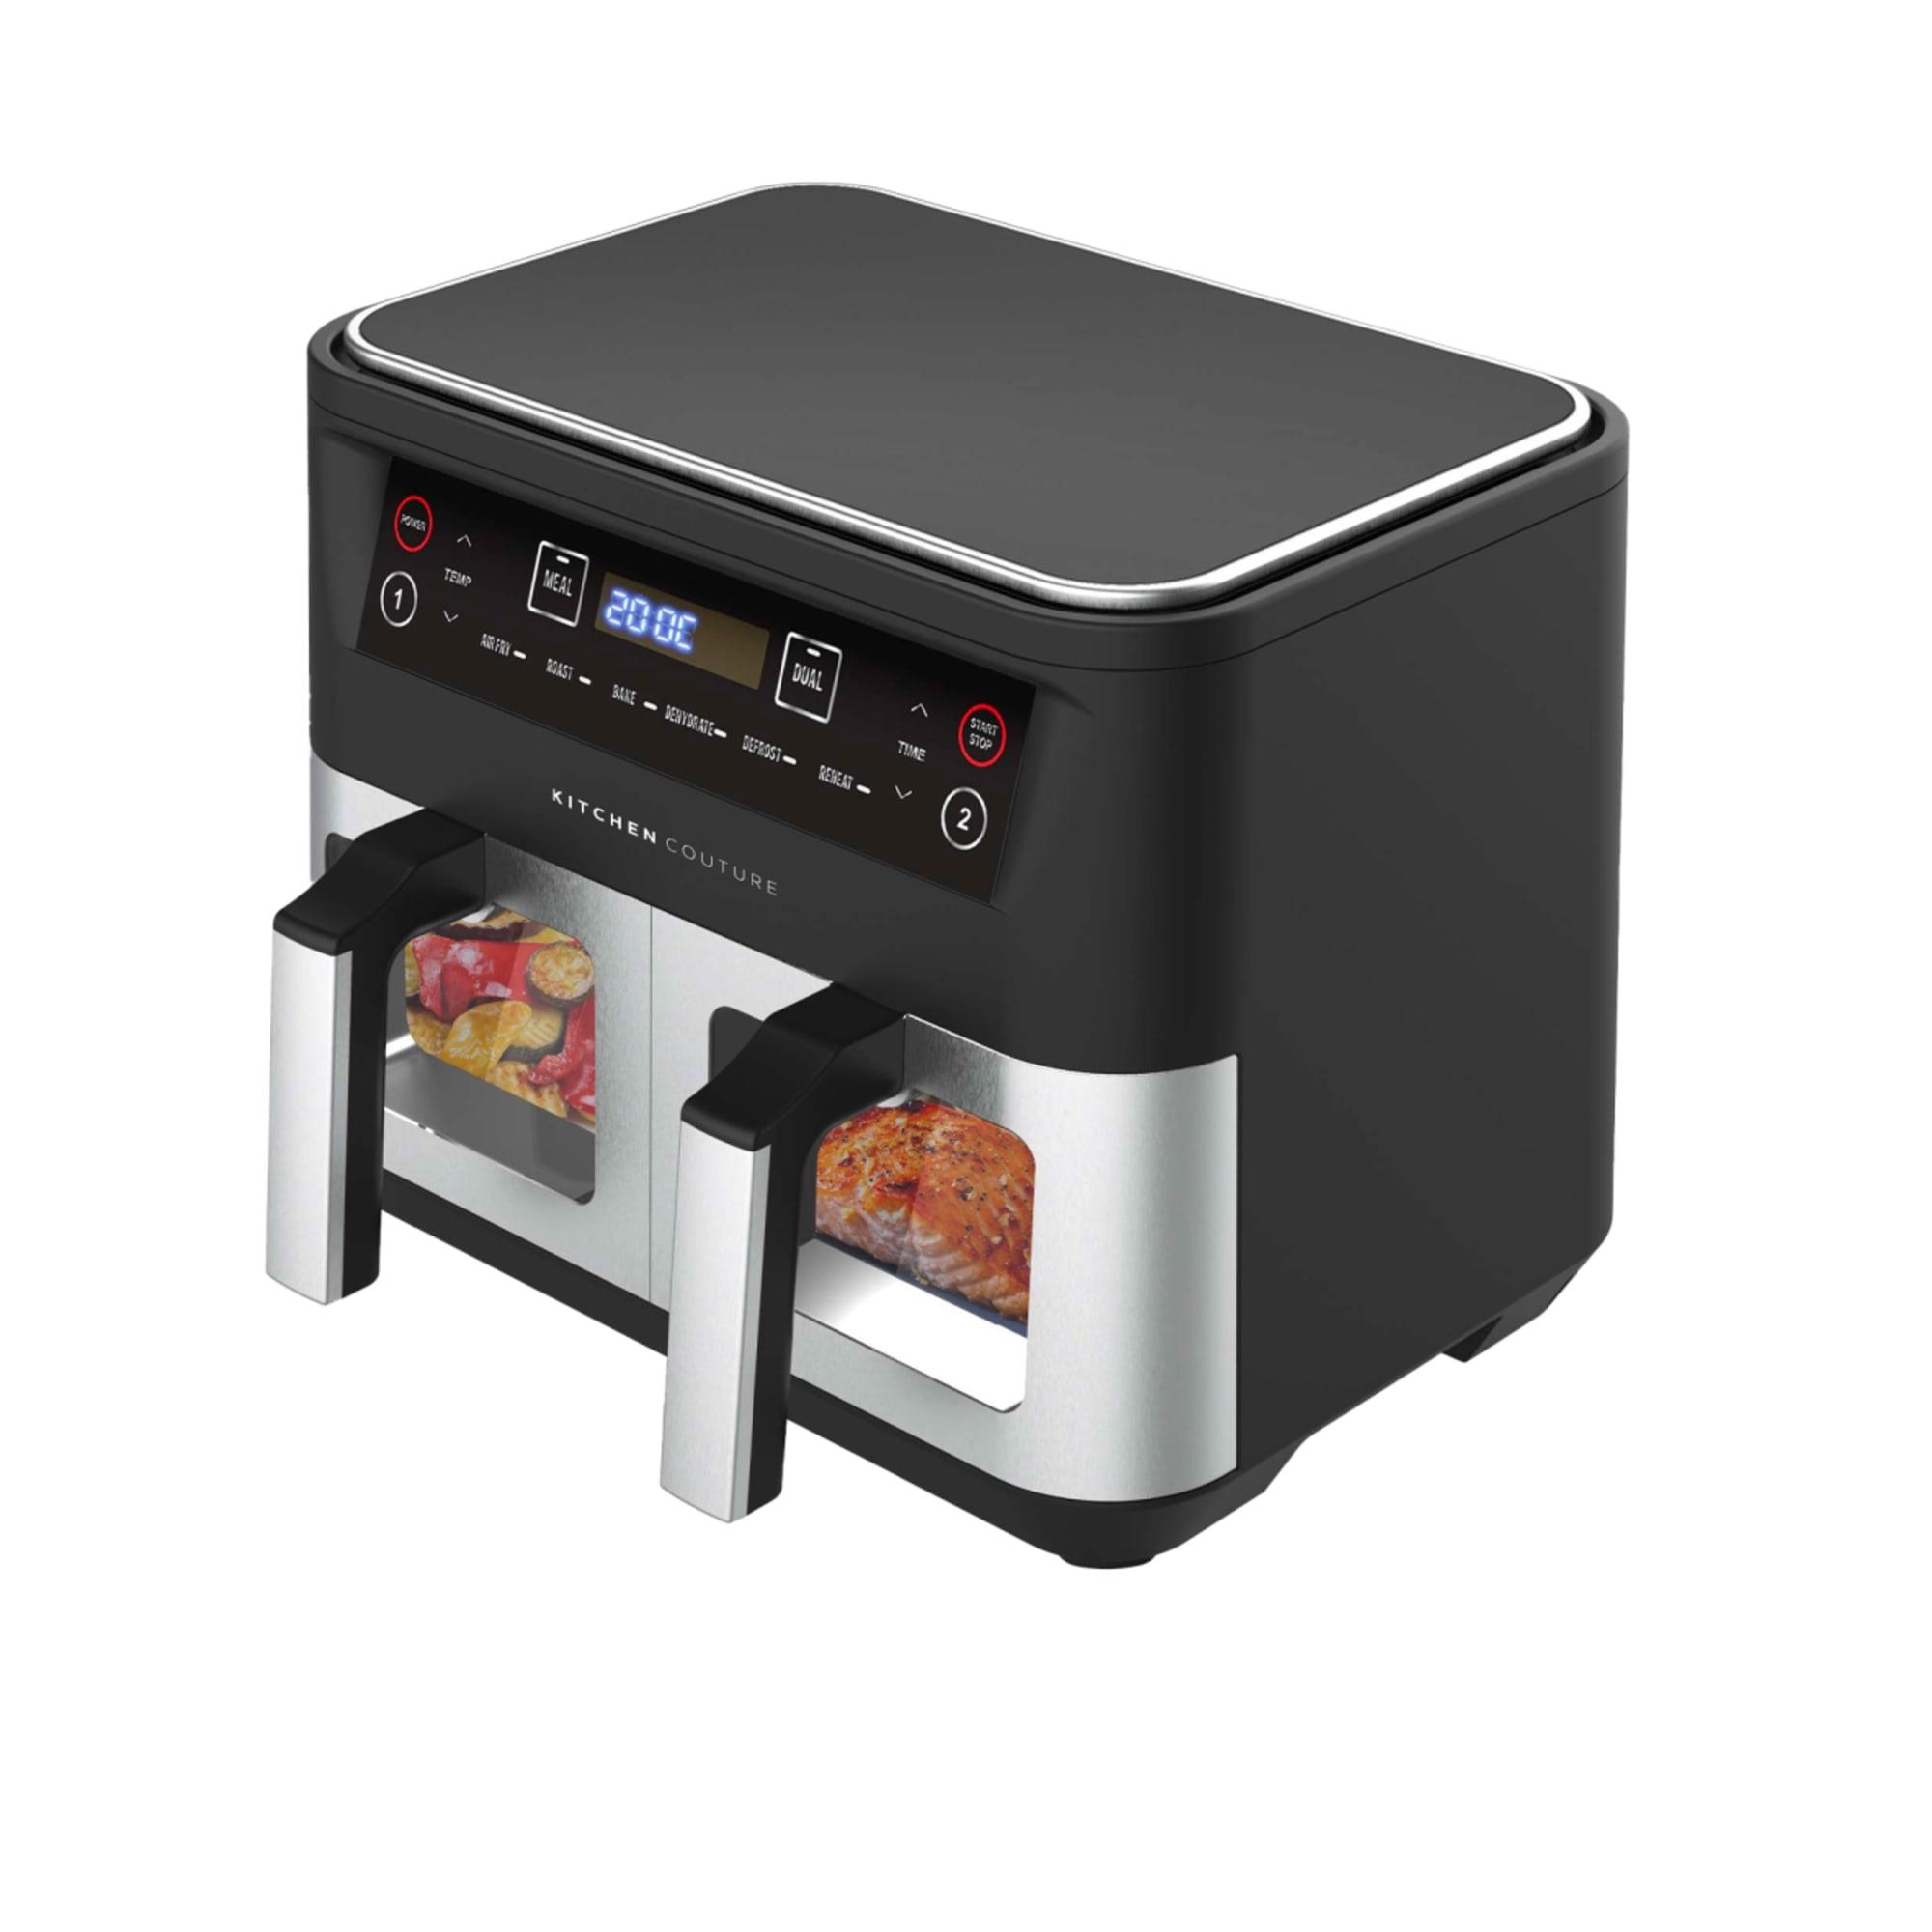 Kitchen Couture Dual View Digital Air Fryer 10L Silver Image 5